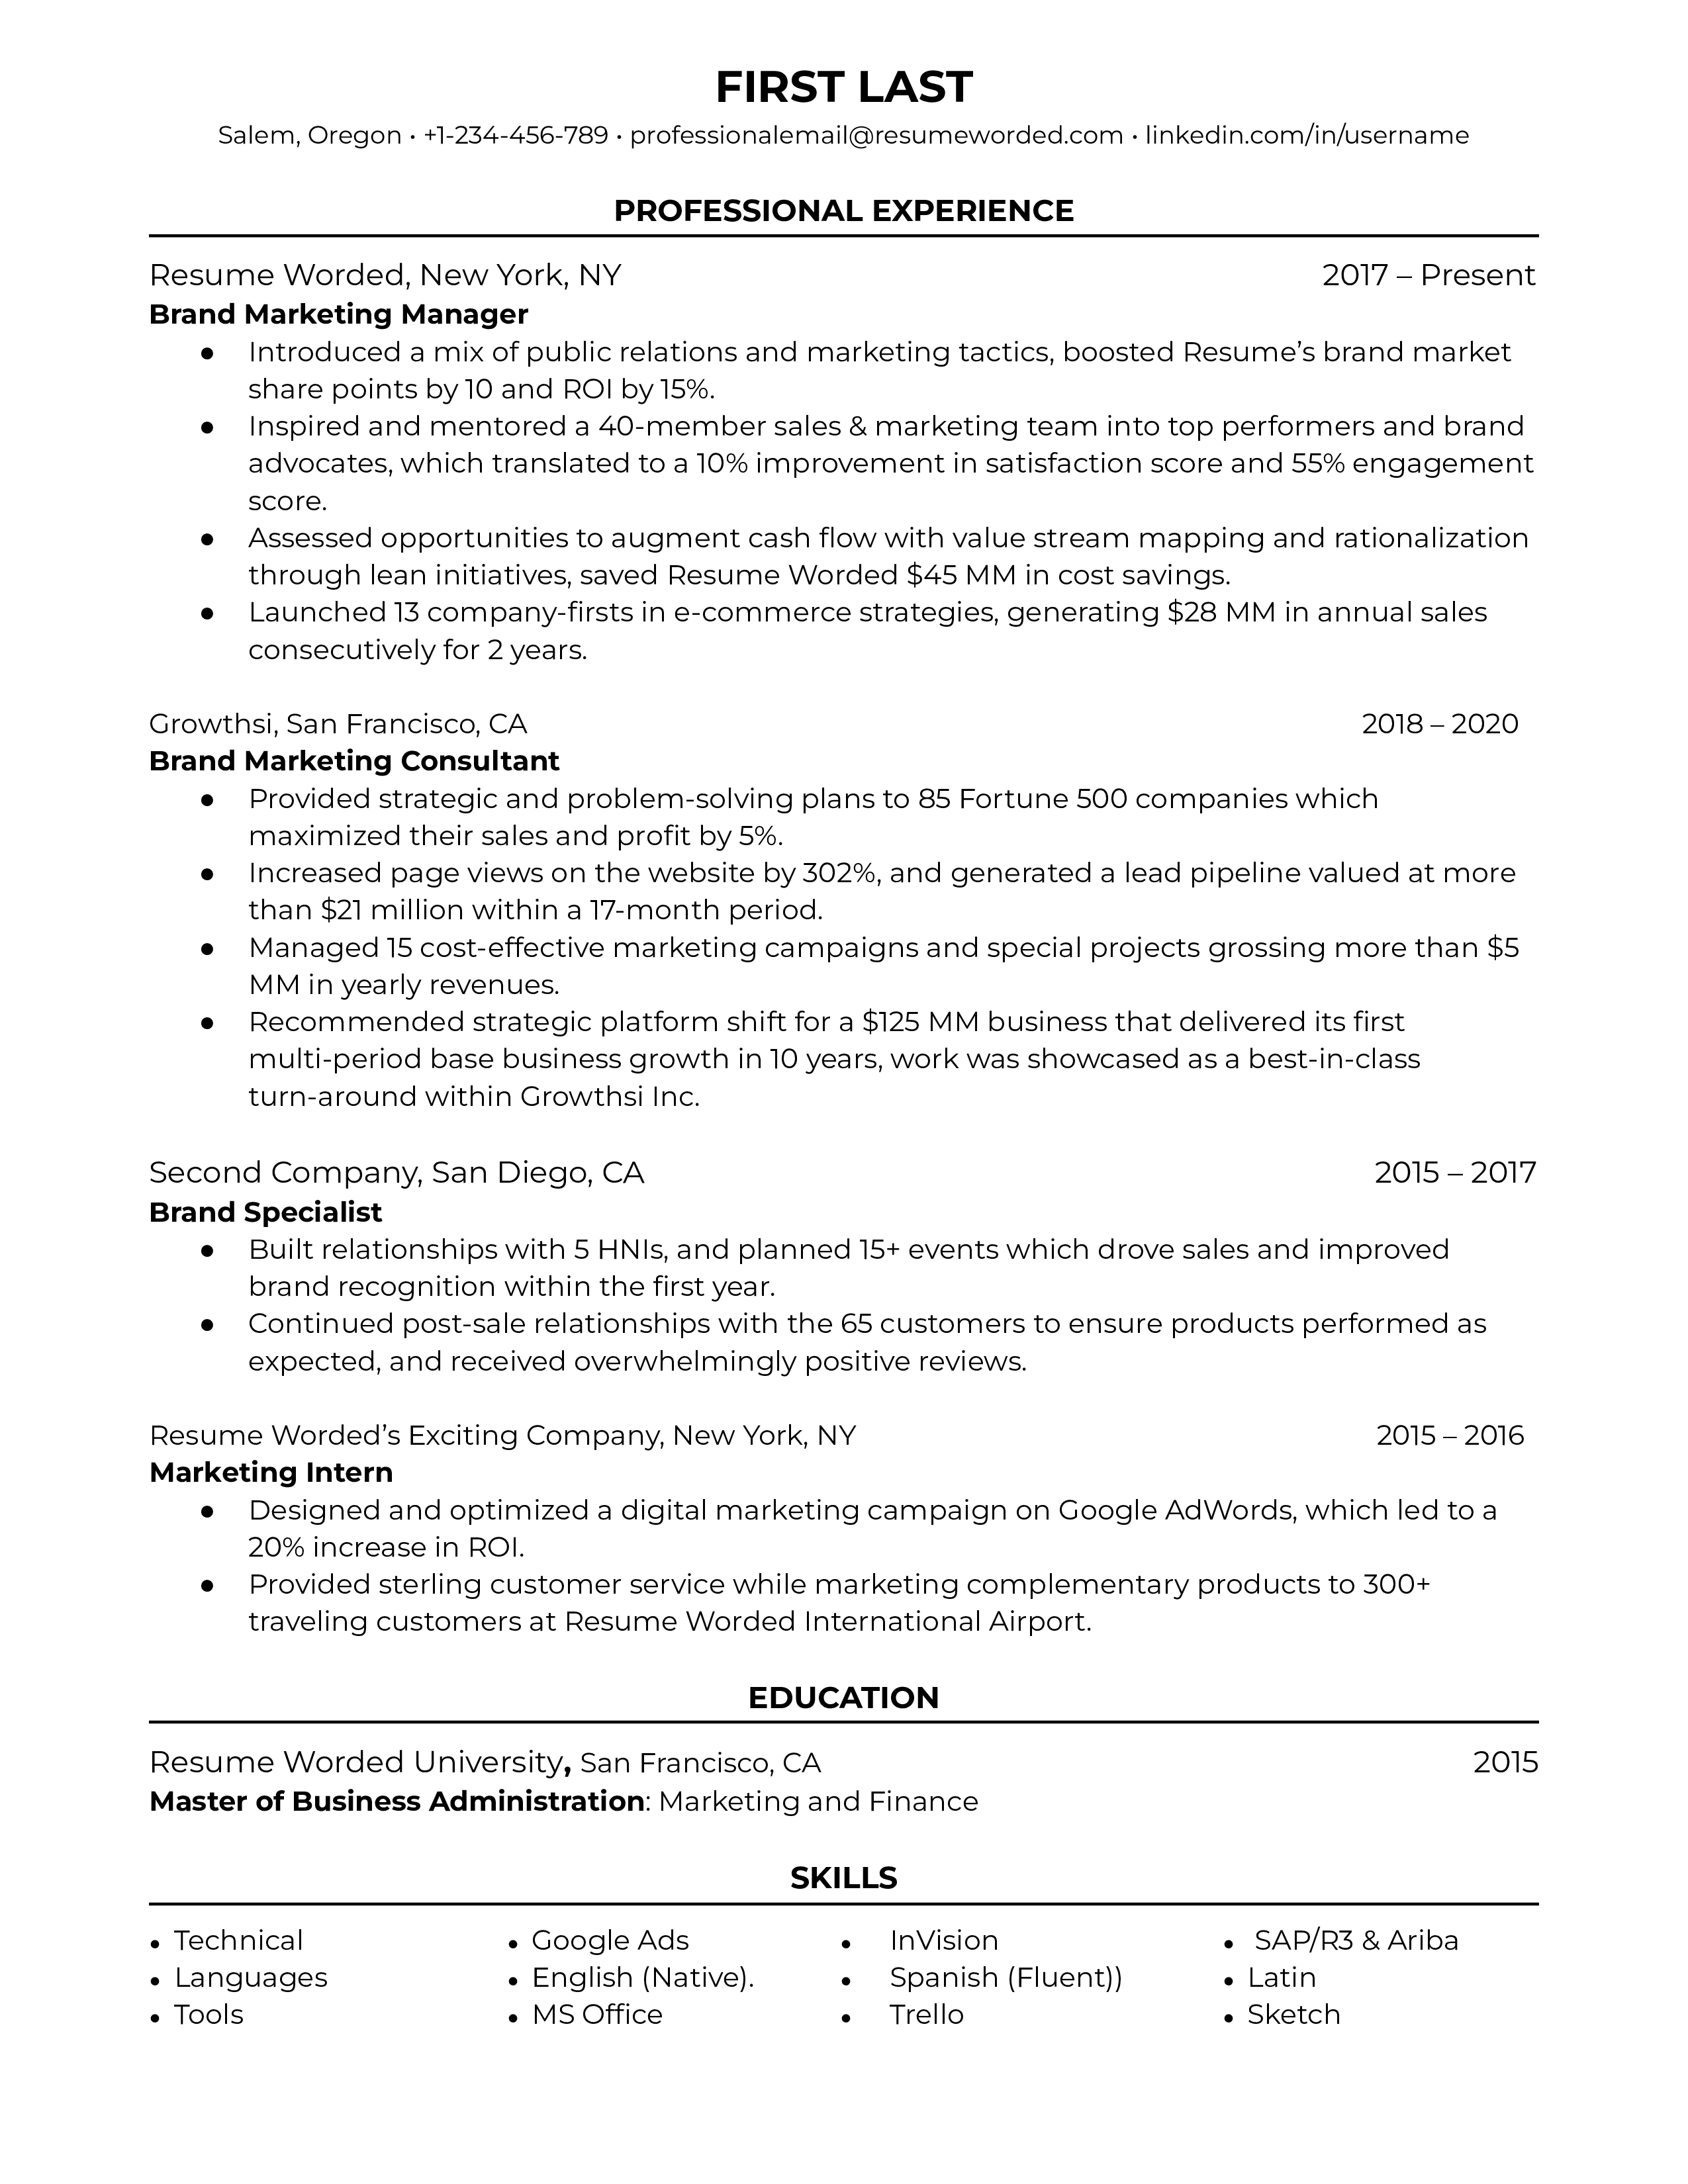 A well-structured CV for a Brand Marketing Manager role showcasing brand strategy skills and data literacy.